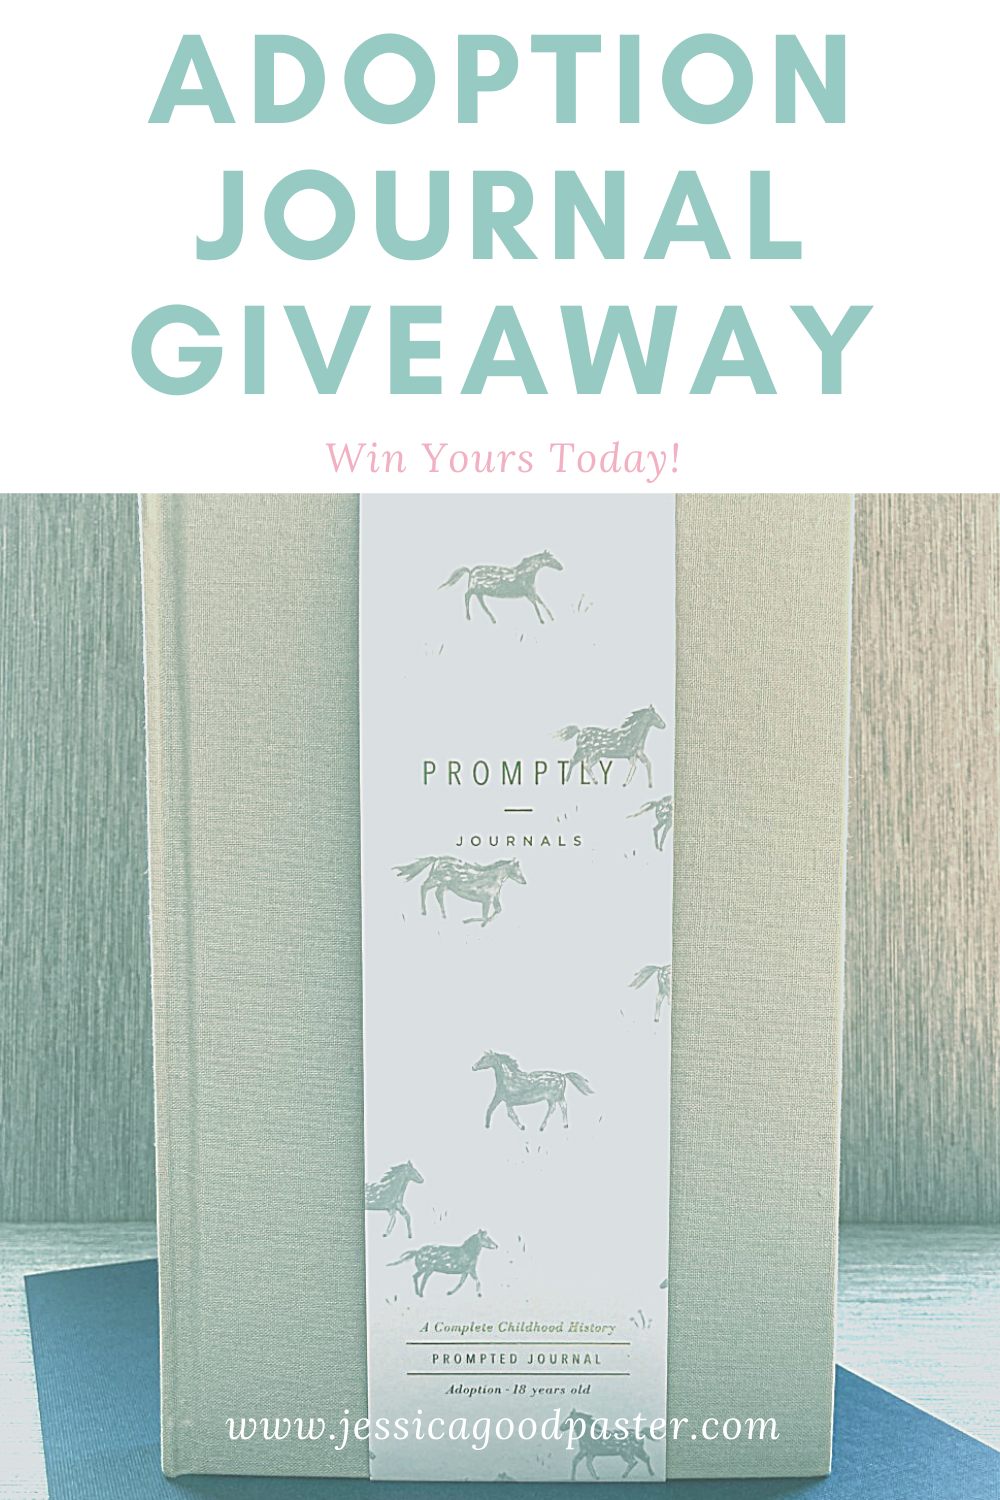 Enter to win a beautiful Adoption History Journal from Promptly Journals! Track the adoption process, journey, and childhood history of your adopted child in this unique journal. Perfect for your domestic newborn adoption or as a gift. Valued at over $30! #giveaway #adoption #journal #adoptionjournal #babybook #gift #adoptionjourney